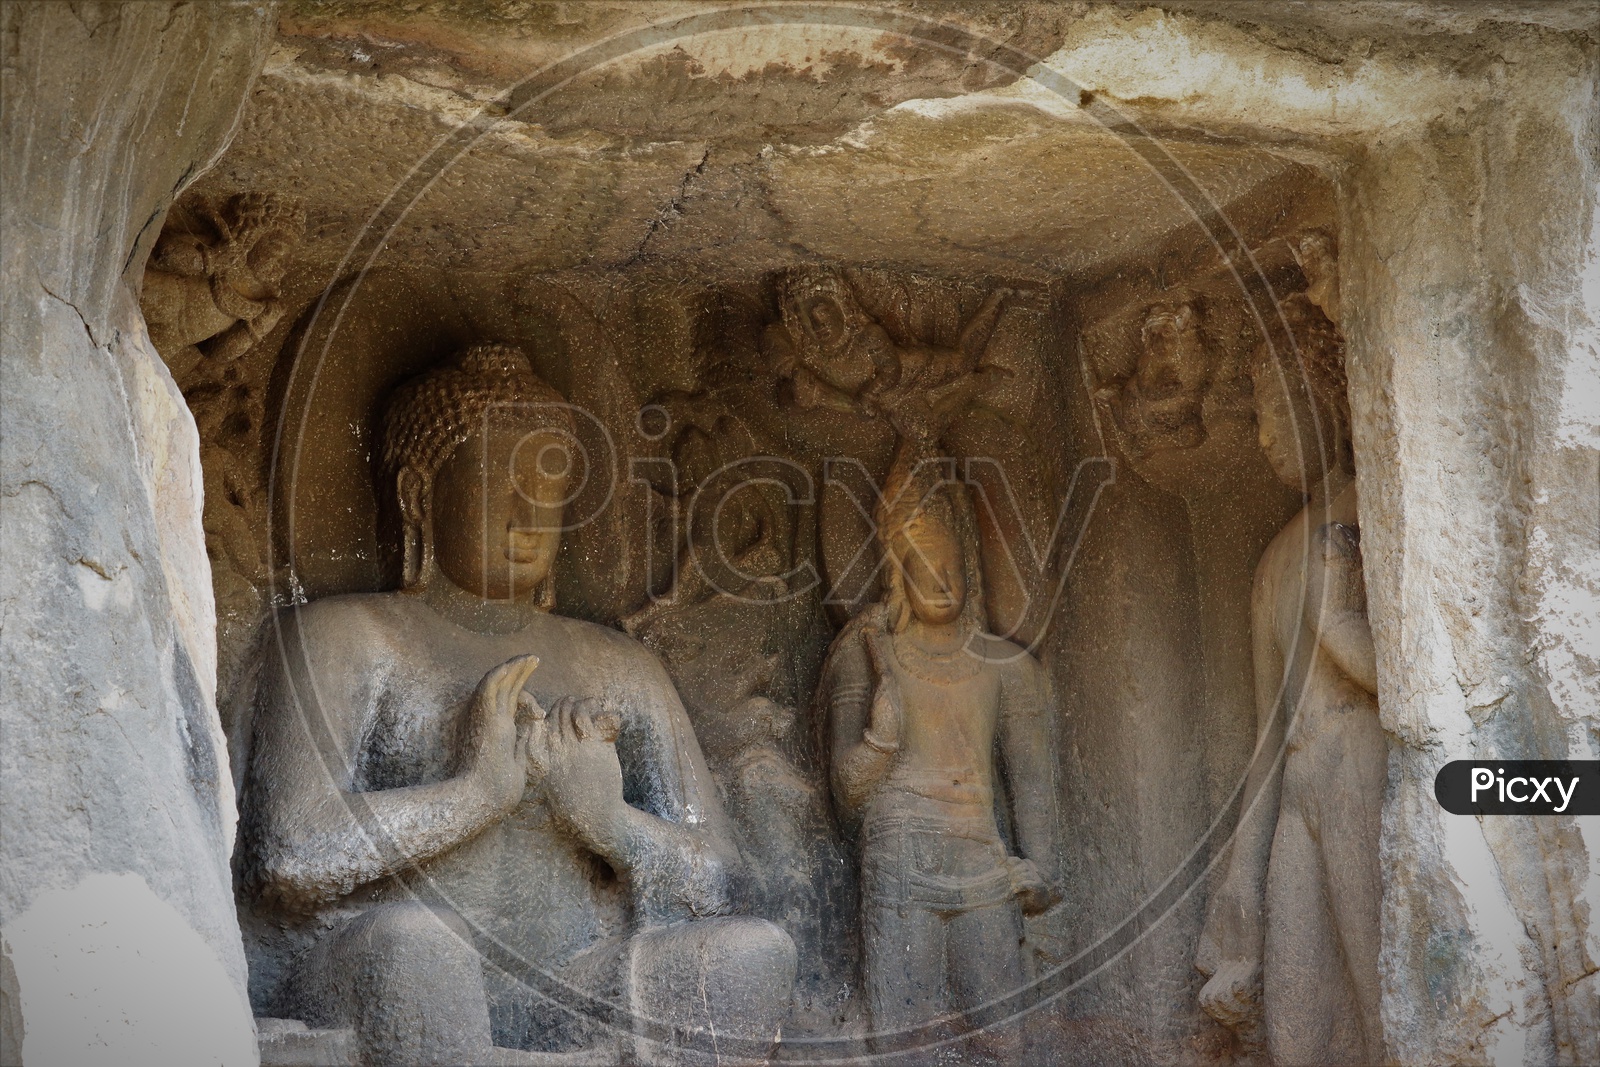 Stone Sculptures Or Cravings Of  Buddha Statues  in  Ajanta Caves